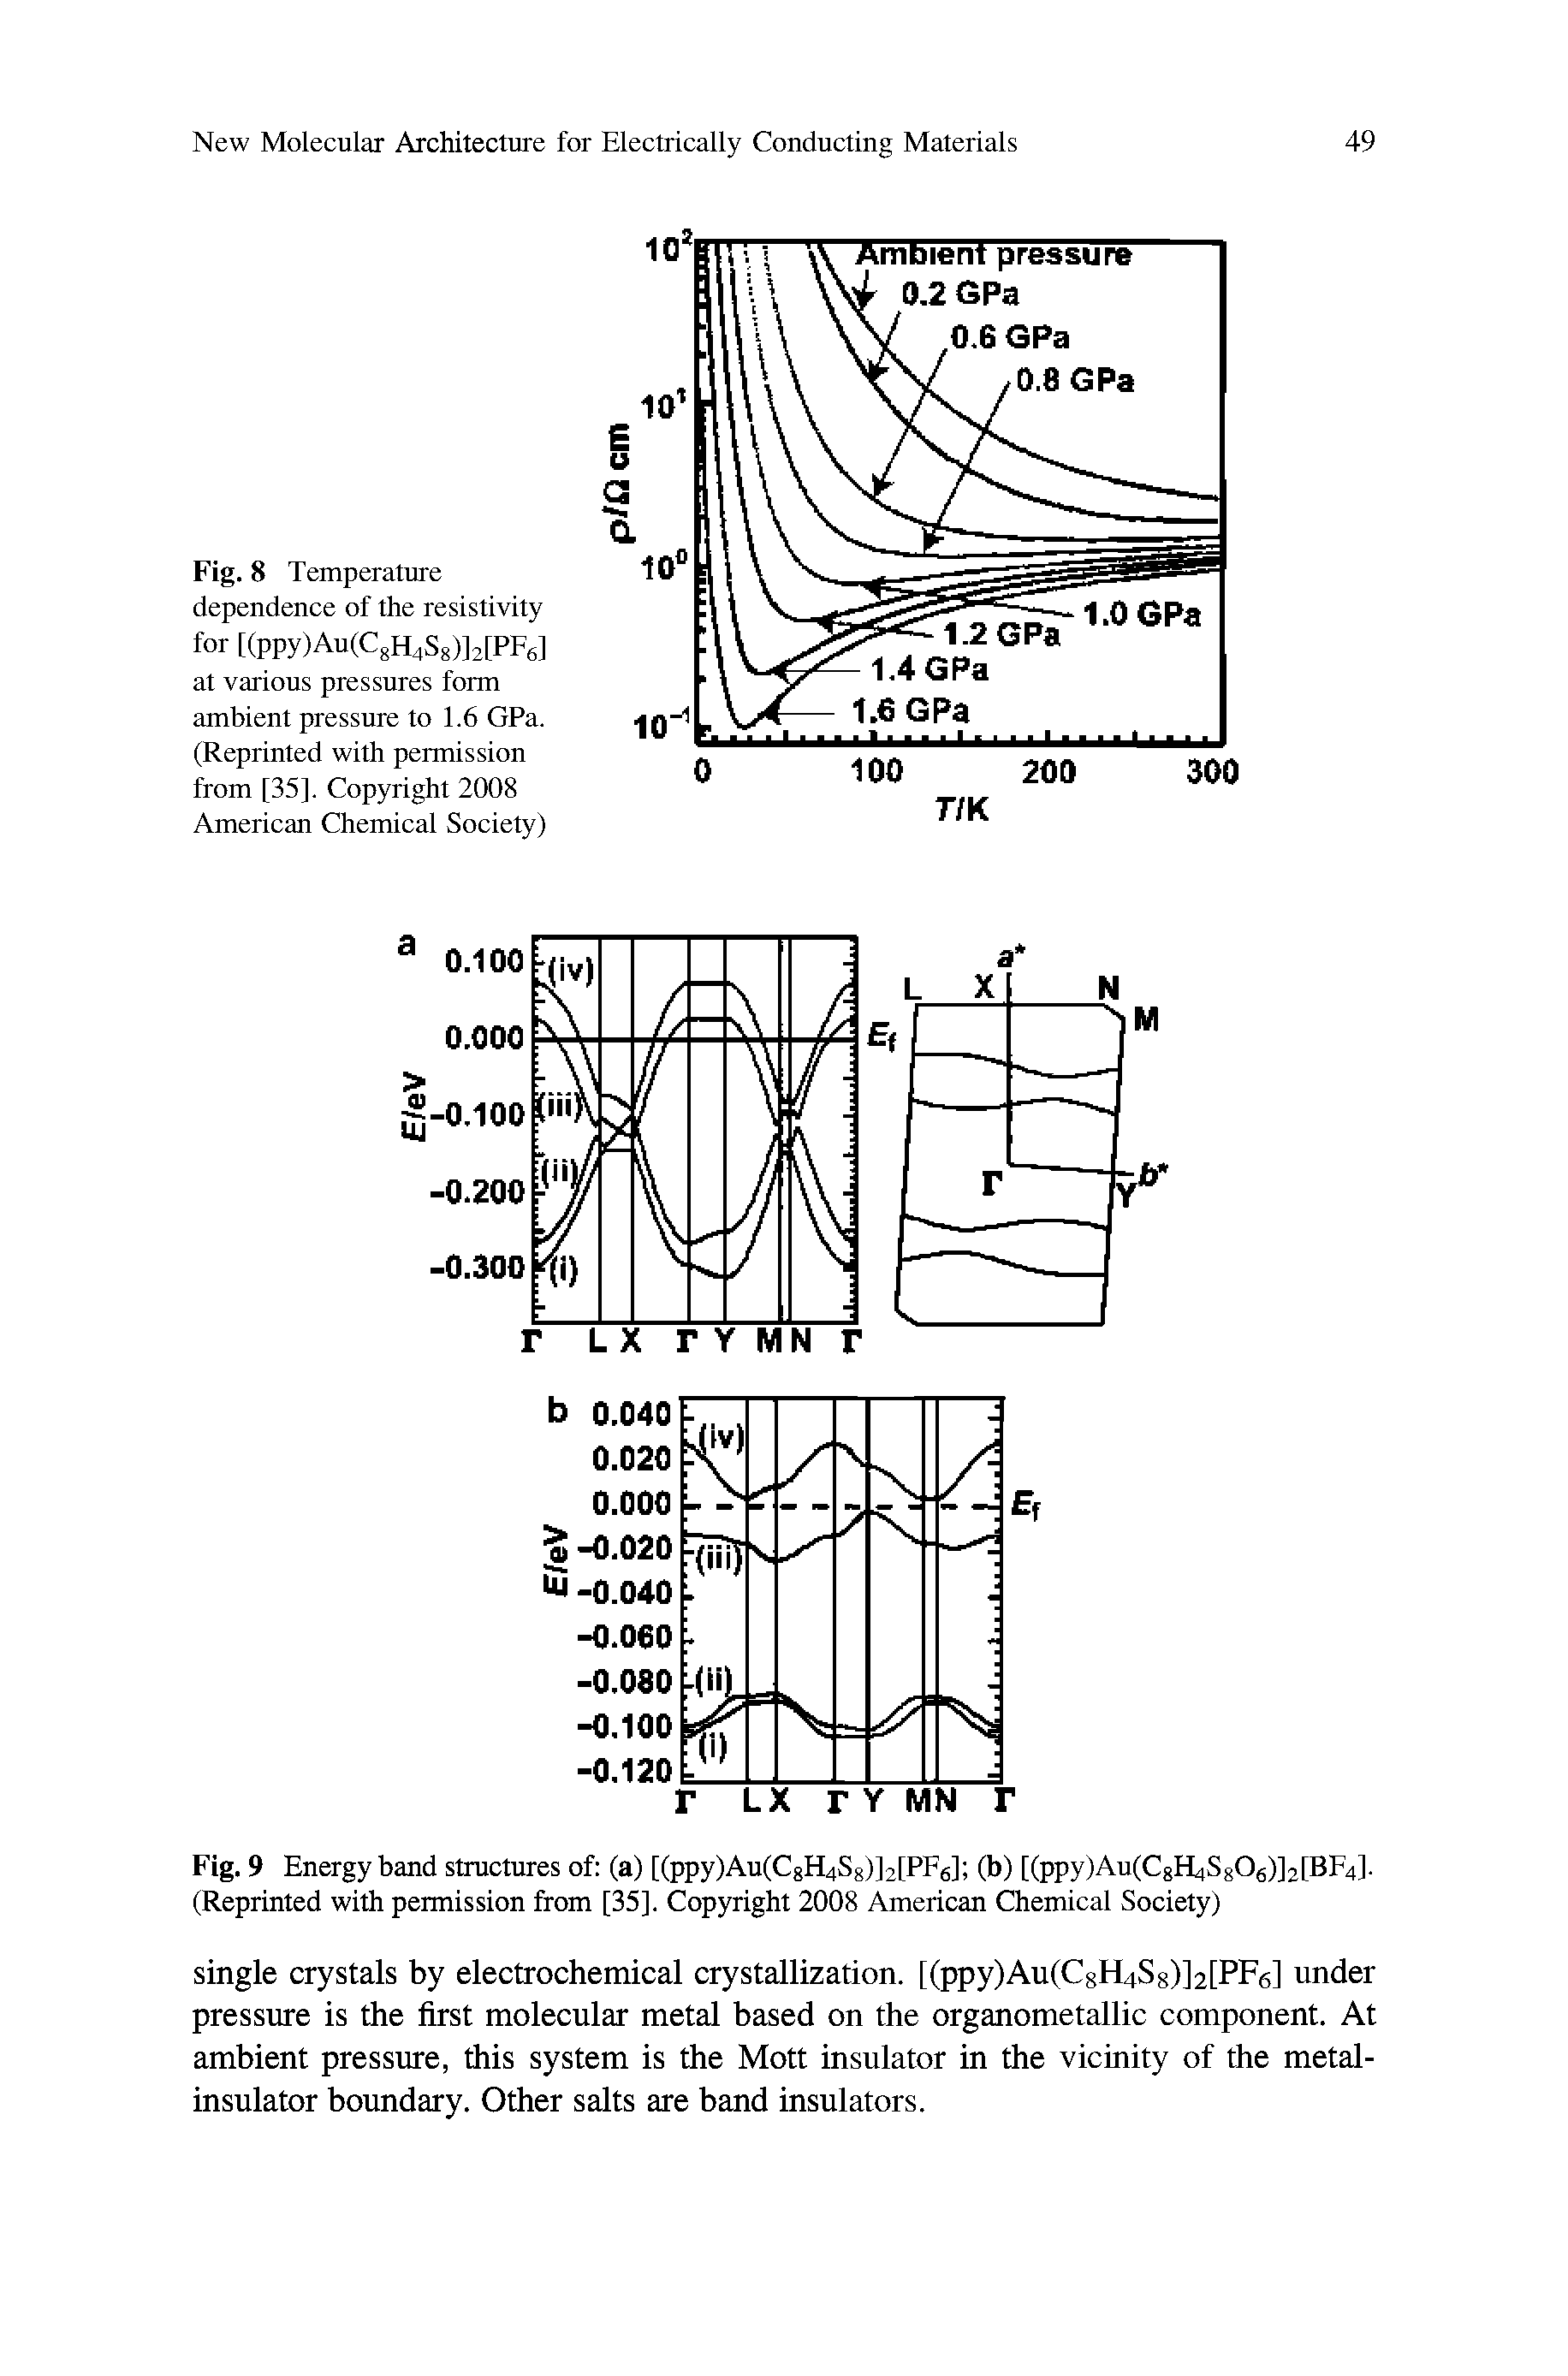 Fig. 8 Temperature dependence of the resistivity for [(ppy)Au(C8H4S8)]2[PF6] at various pressures form ambient pressure to 1.6 GPa. (Reprinted with permission from [35], Copyright 2008 American Chemical Society)...